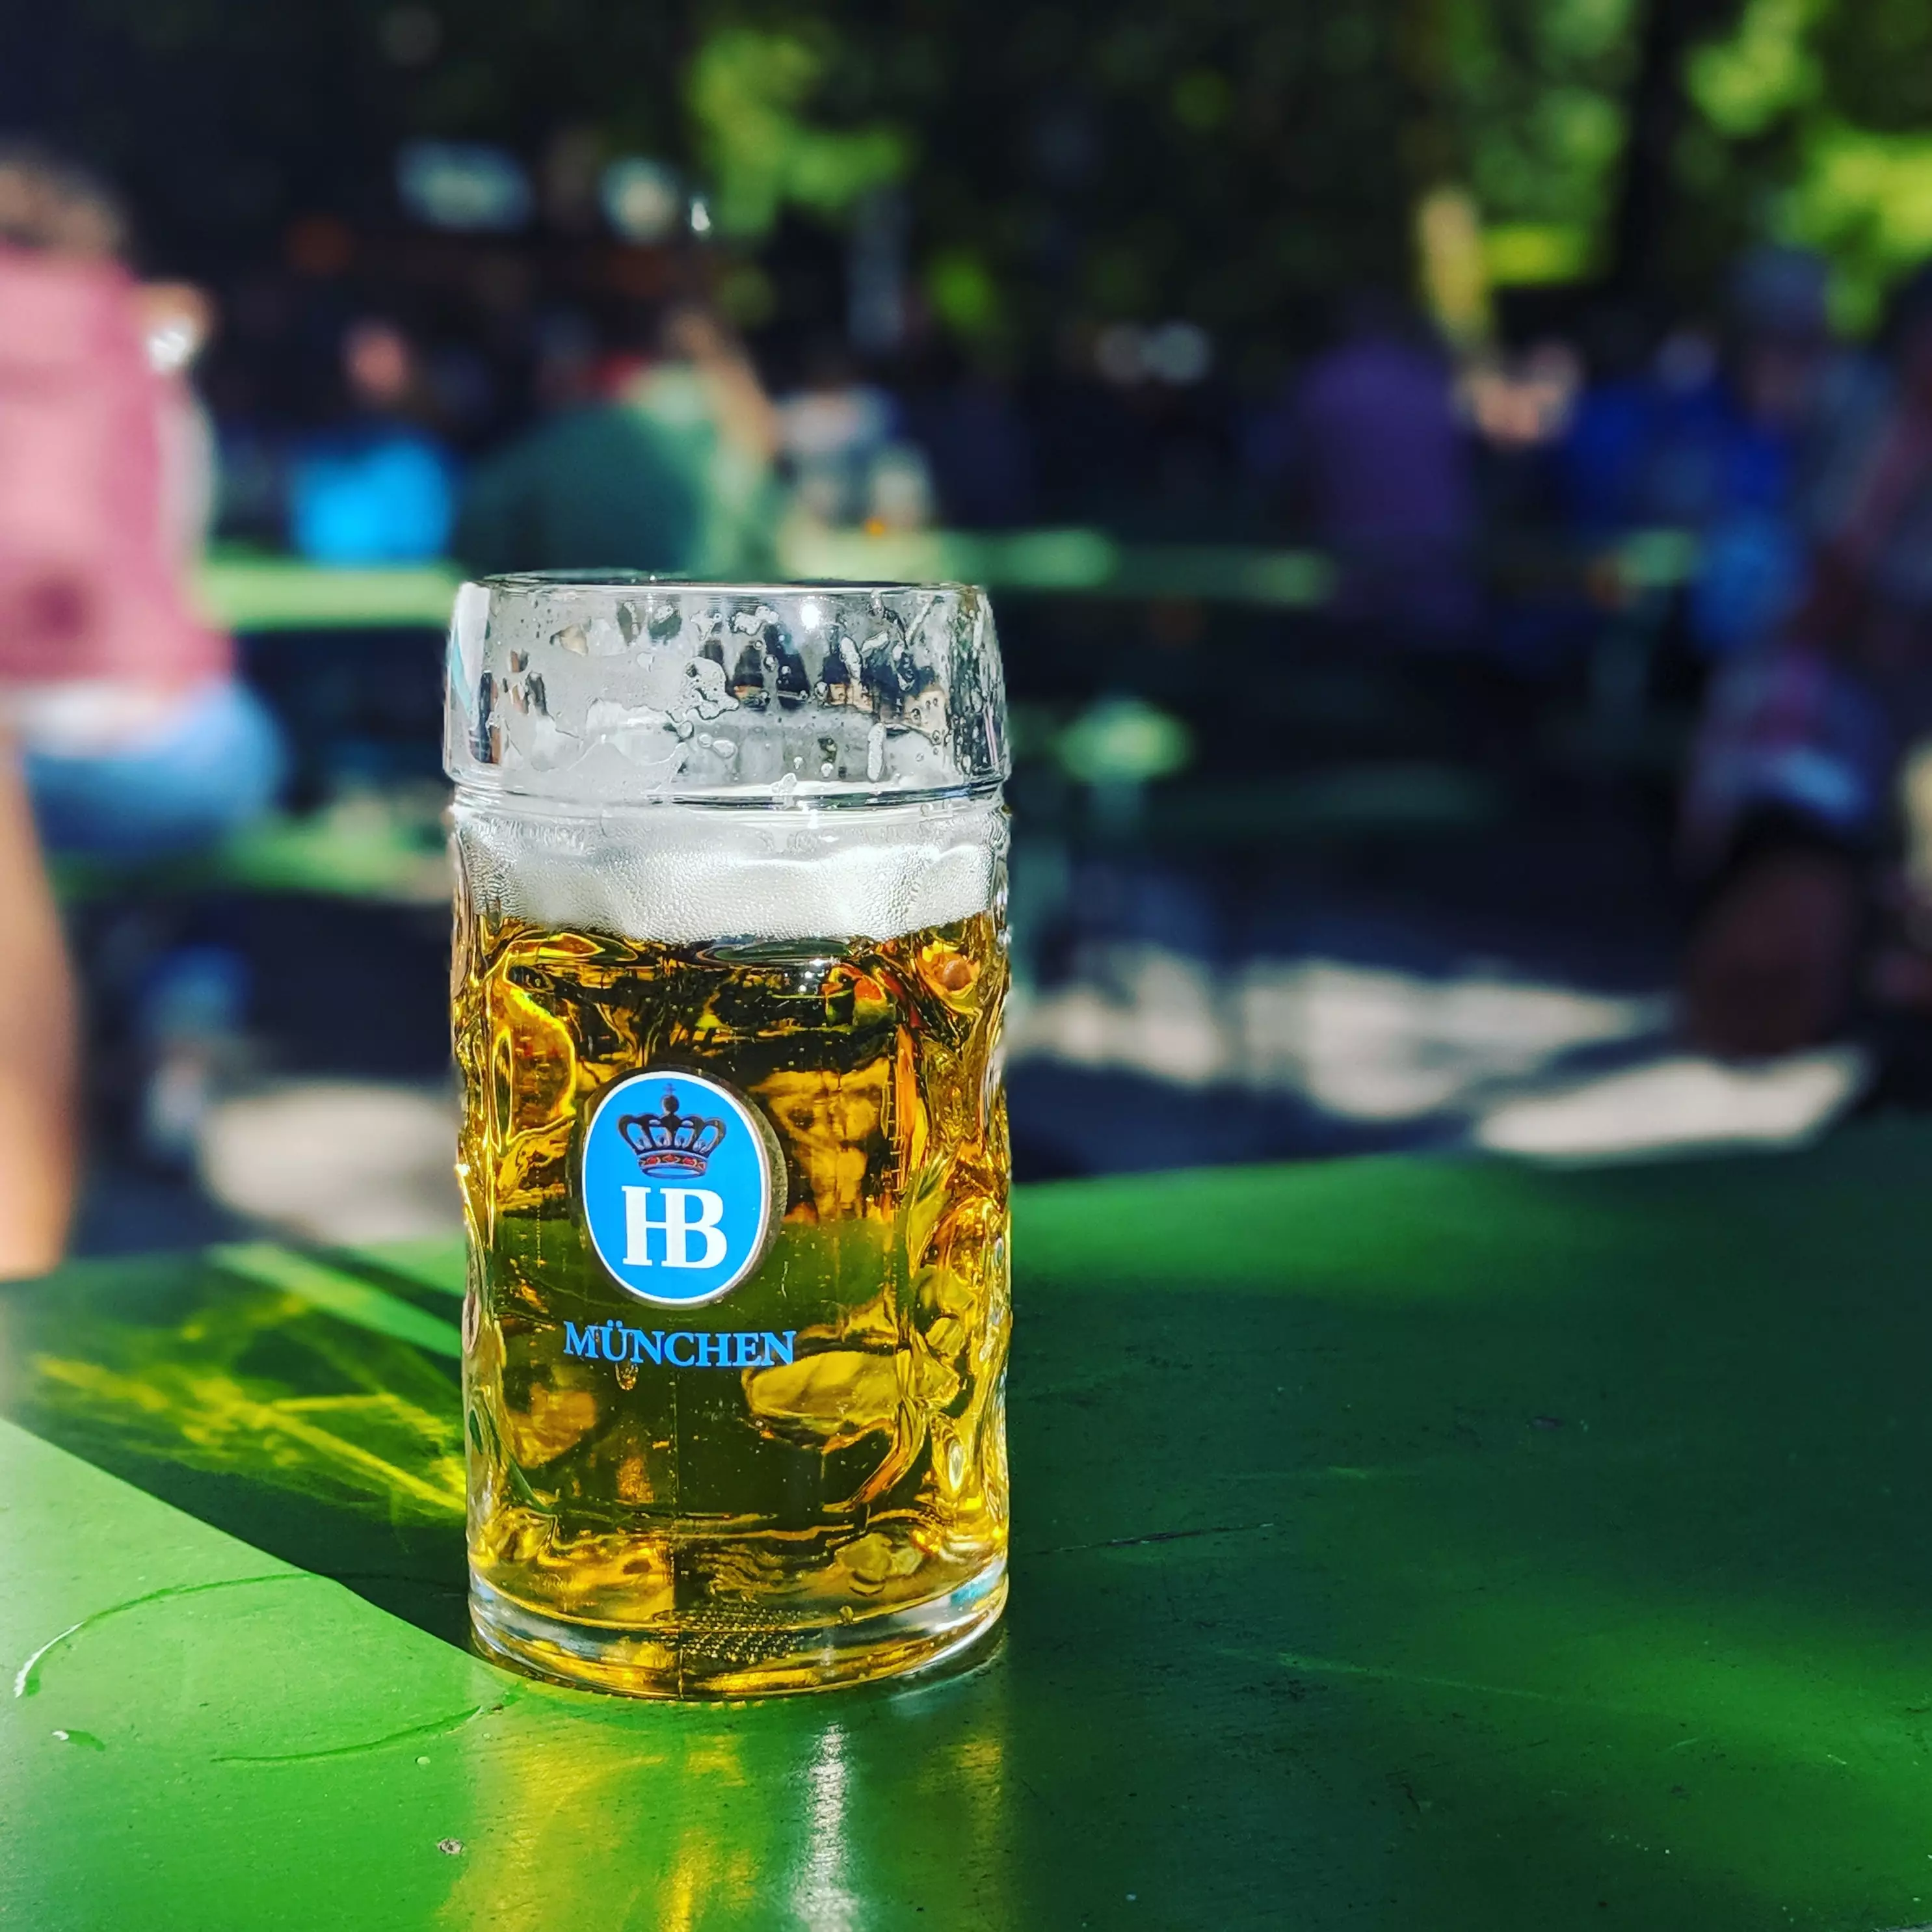 Steins (two-pint glasses) could be the new normal (